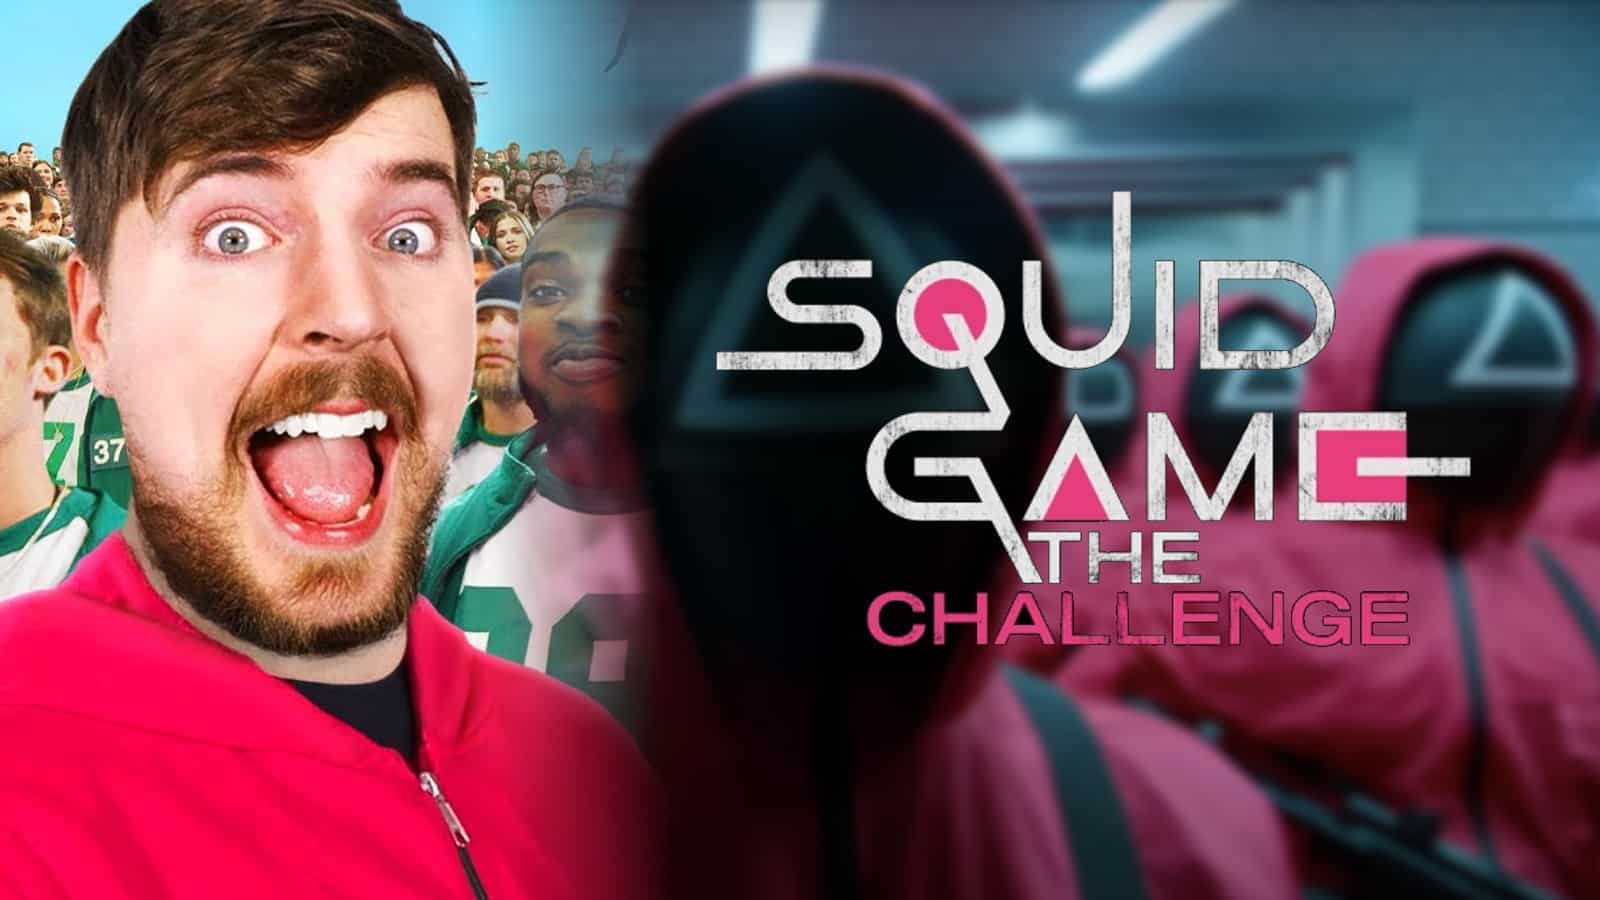 Squid Game: The Challenge is similar to Mr Beast's recreation